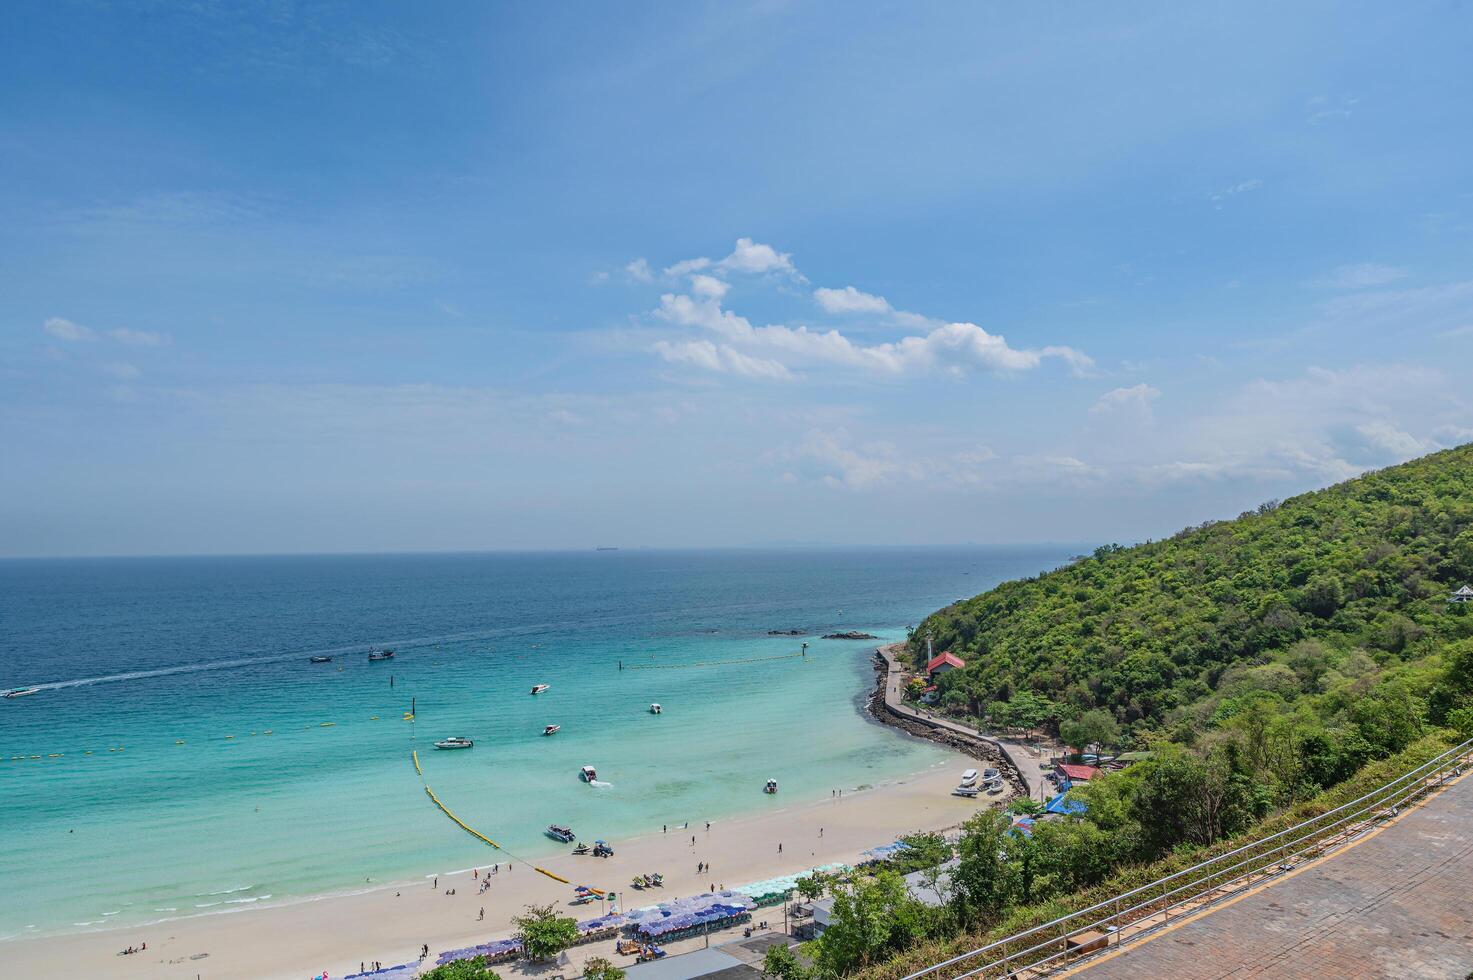 Landscape view of tawean beach with crowded of tourist on the beach in cloudy day.Tawaen Beach is the main Beach on the popular Koh Larn Island. photo